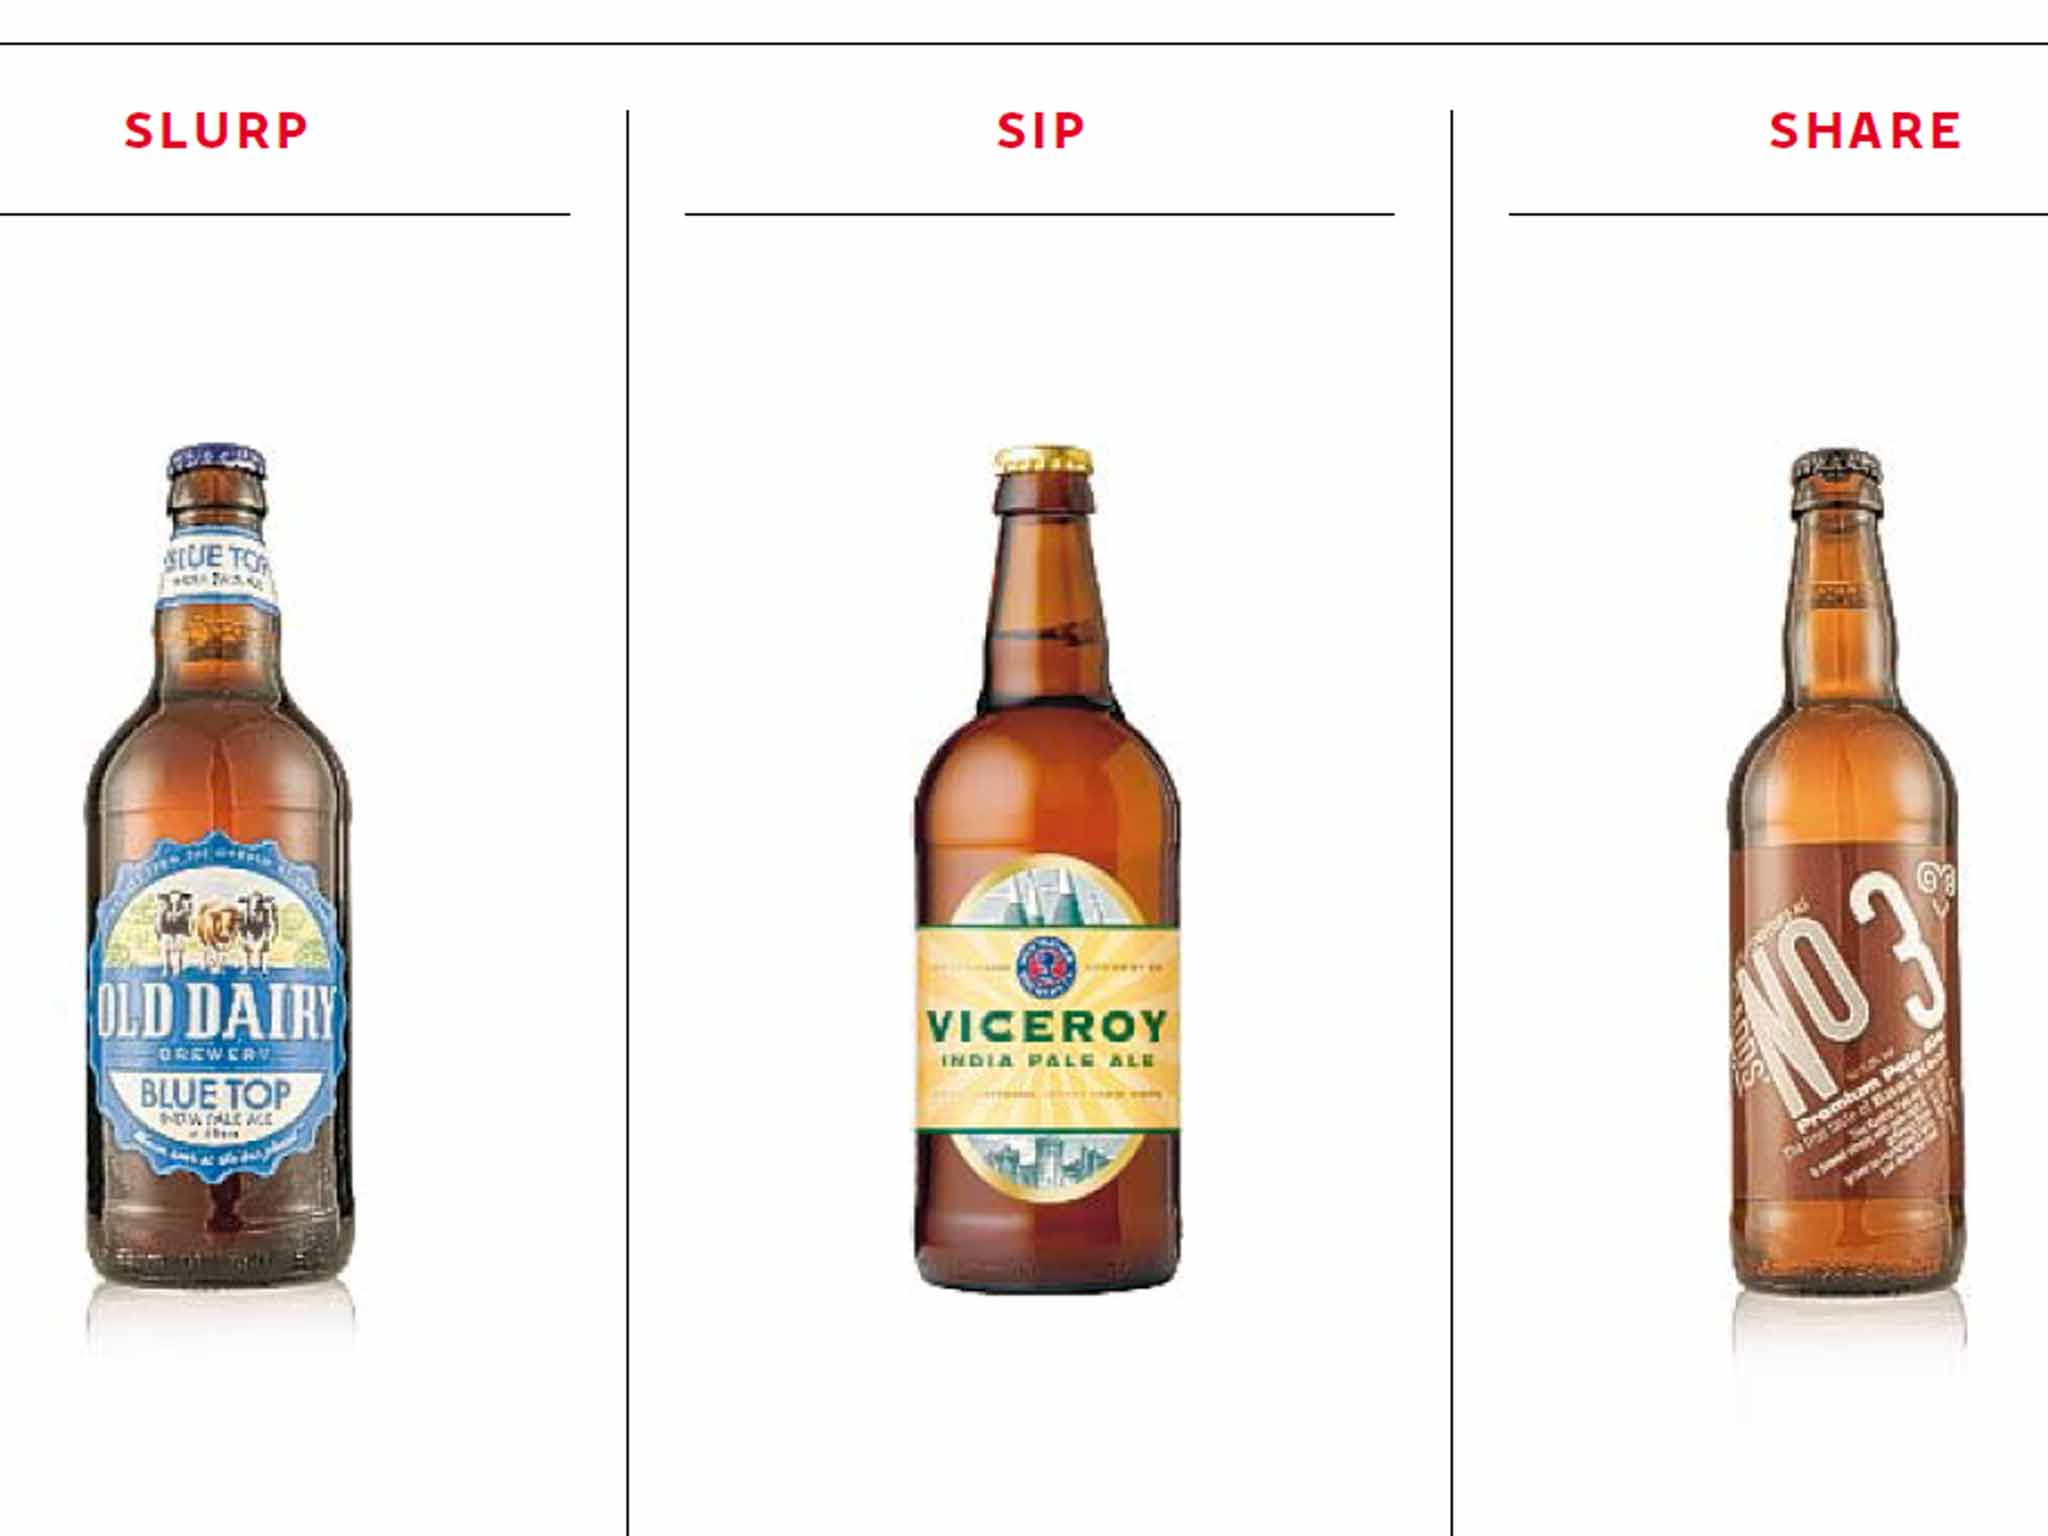 Three to try: Old Dairy Blue Top, Westerham Viceroy IPA, and Gadds' No 3